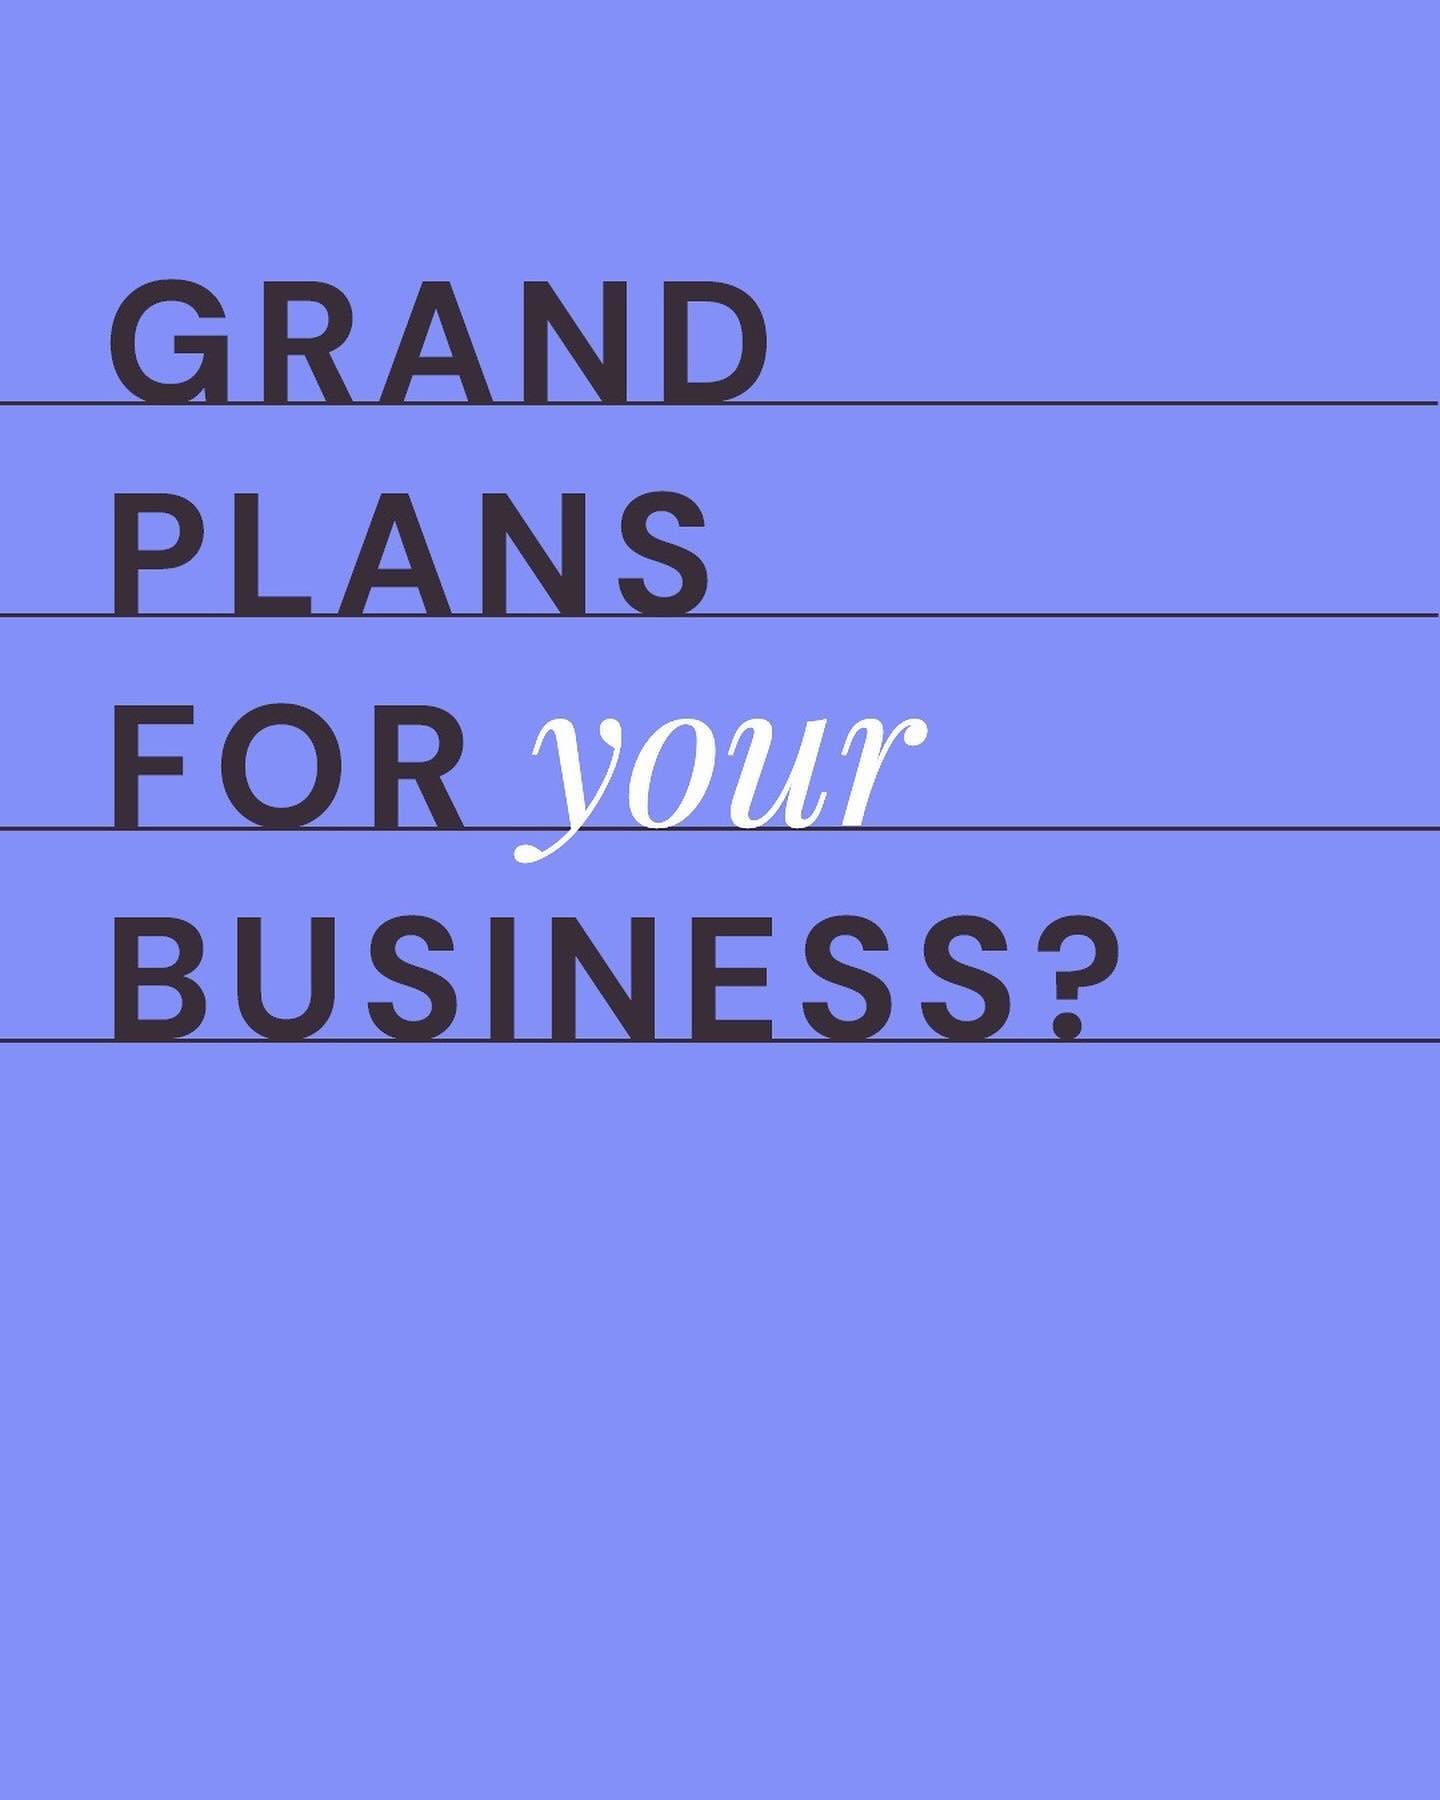 Thoughts of grandeur for your business?

I know that when I entered the business world, I wanted the very best for RJC. 

As business owners we all have these fabulous (yet totally attainable) ideas of where we want to be with our business - the visi